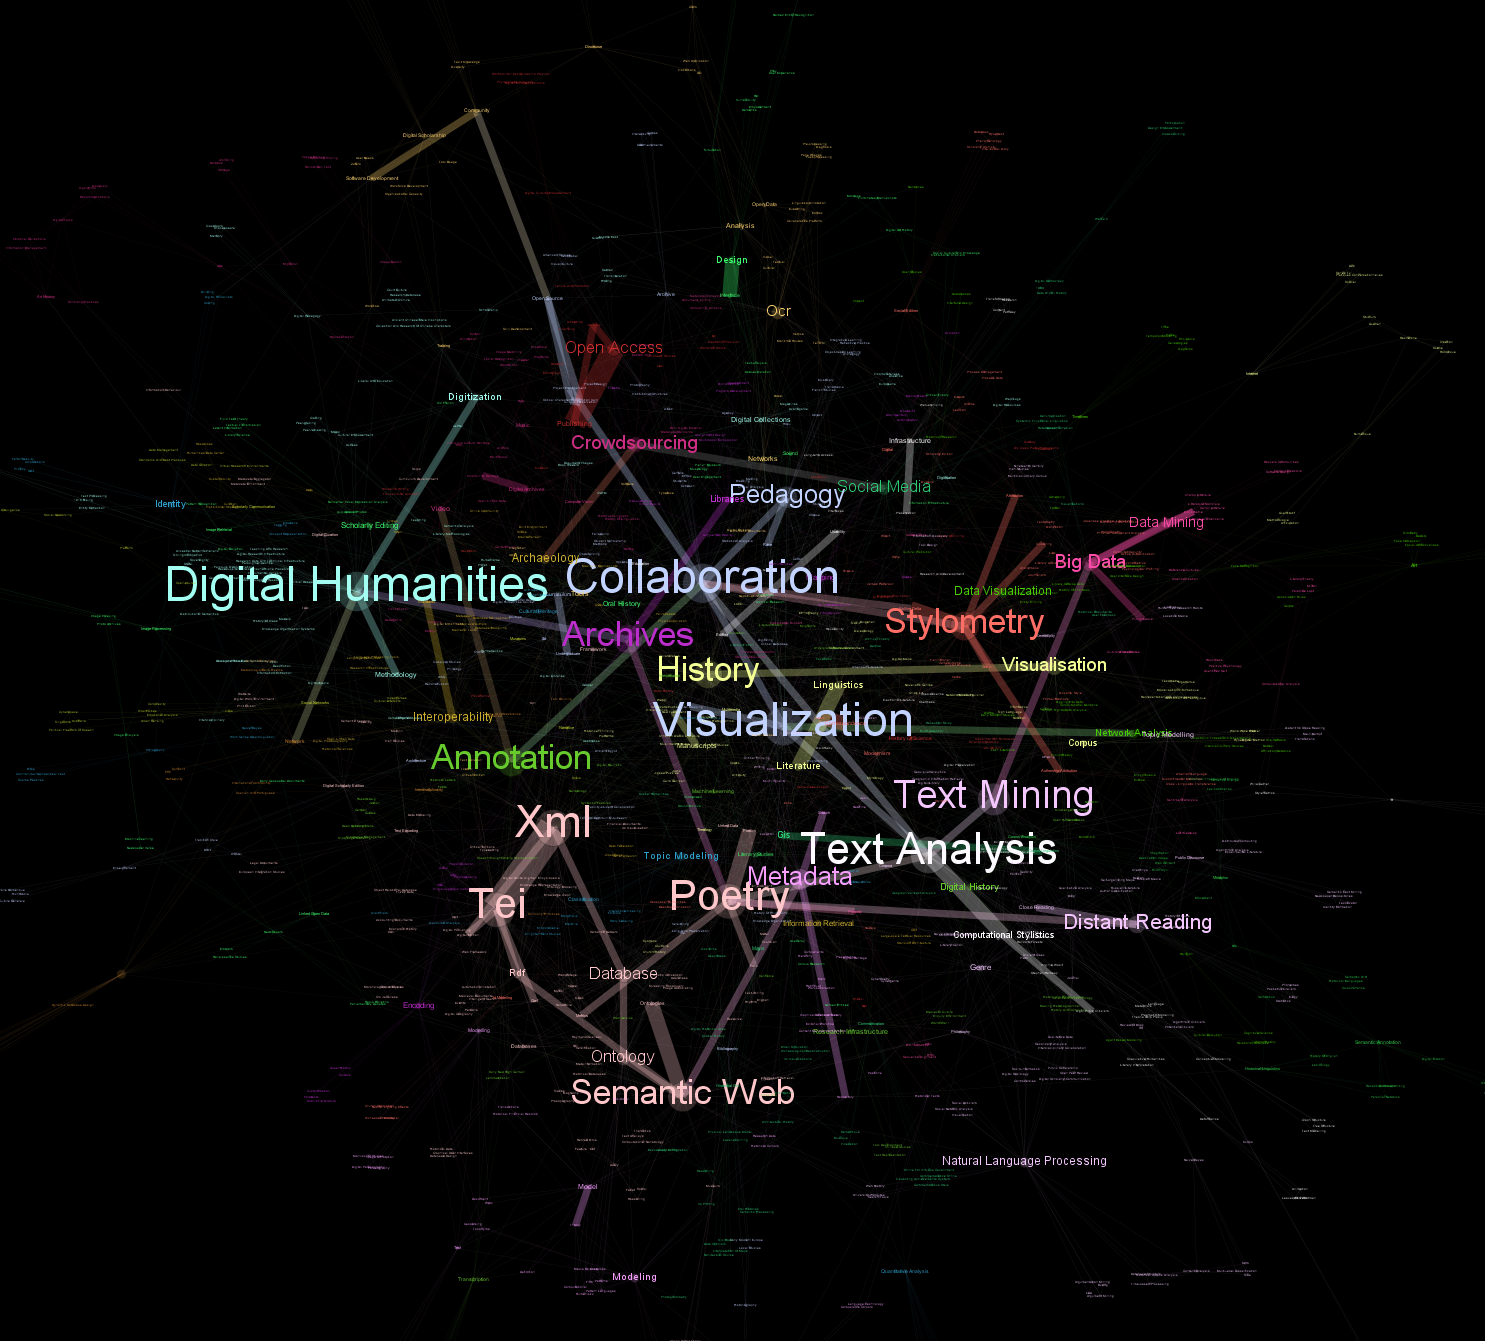 Figure 3. Co-occurrence of DH2014 author-submitted keywords.